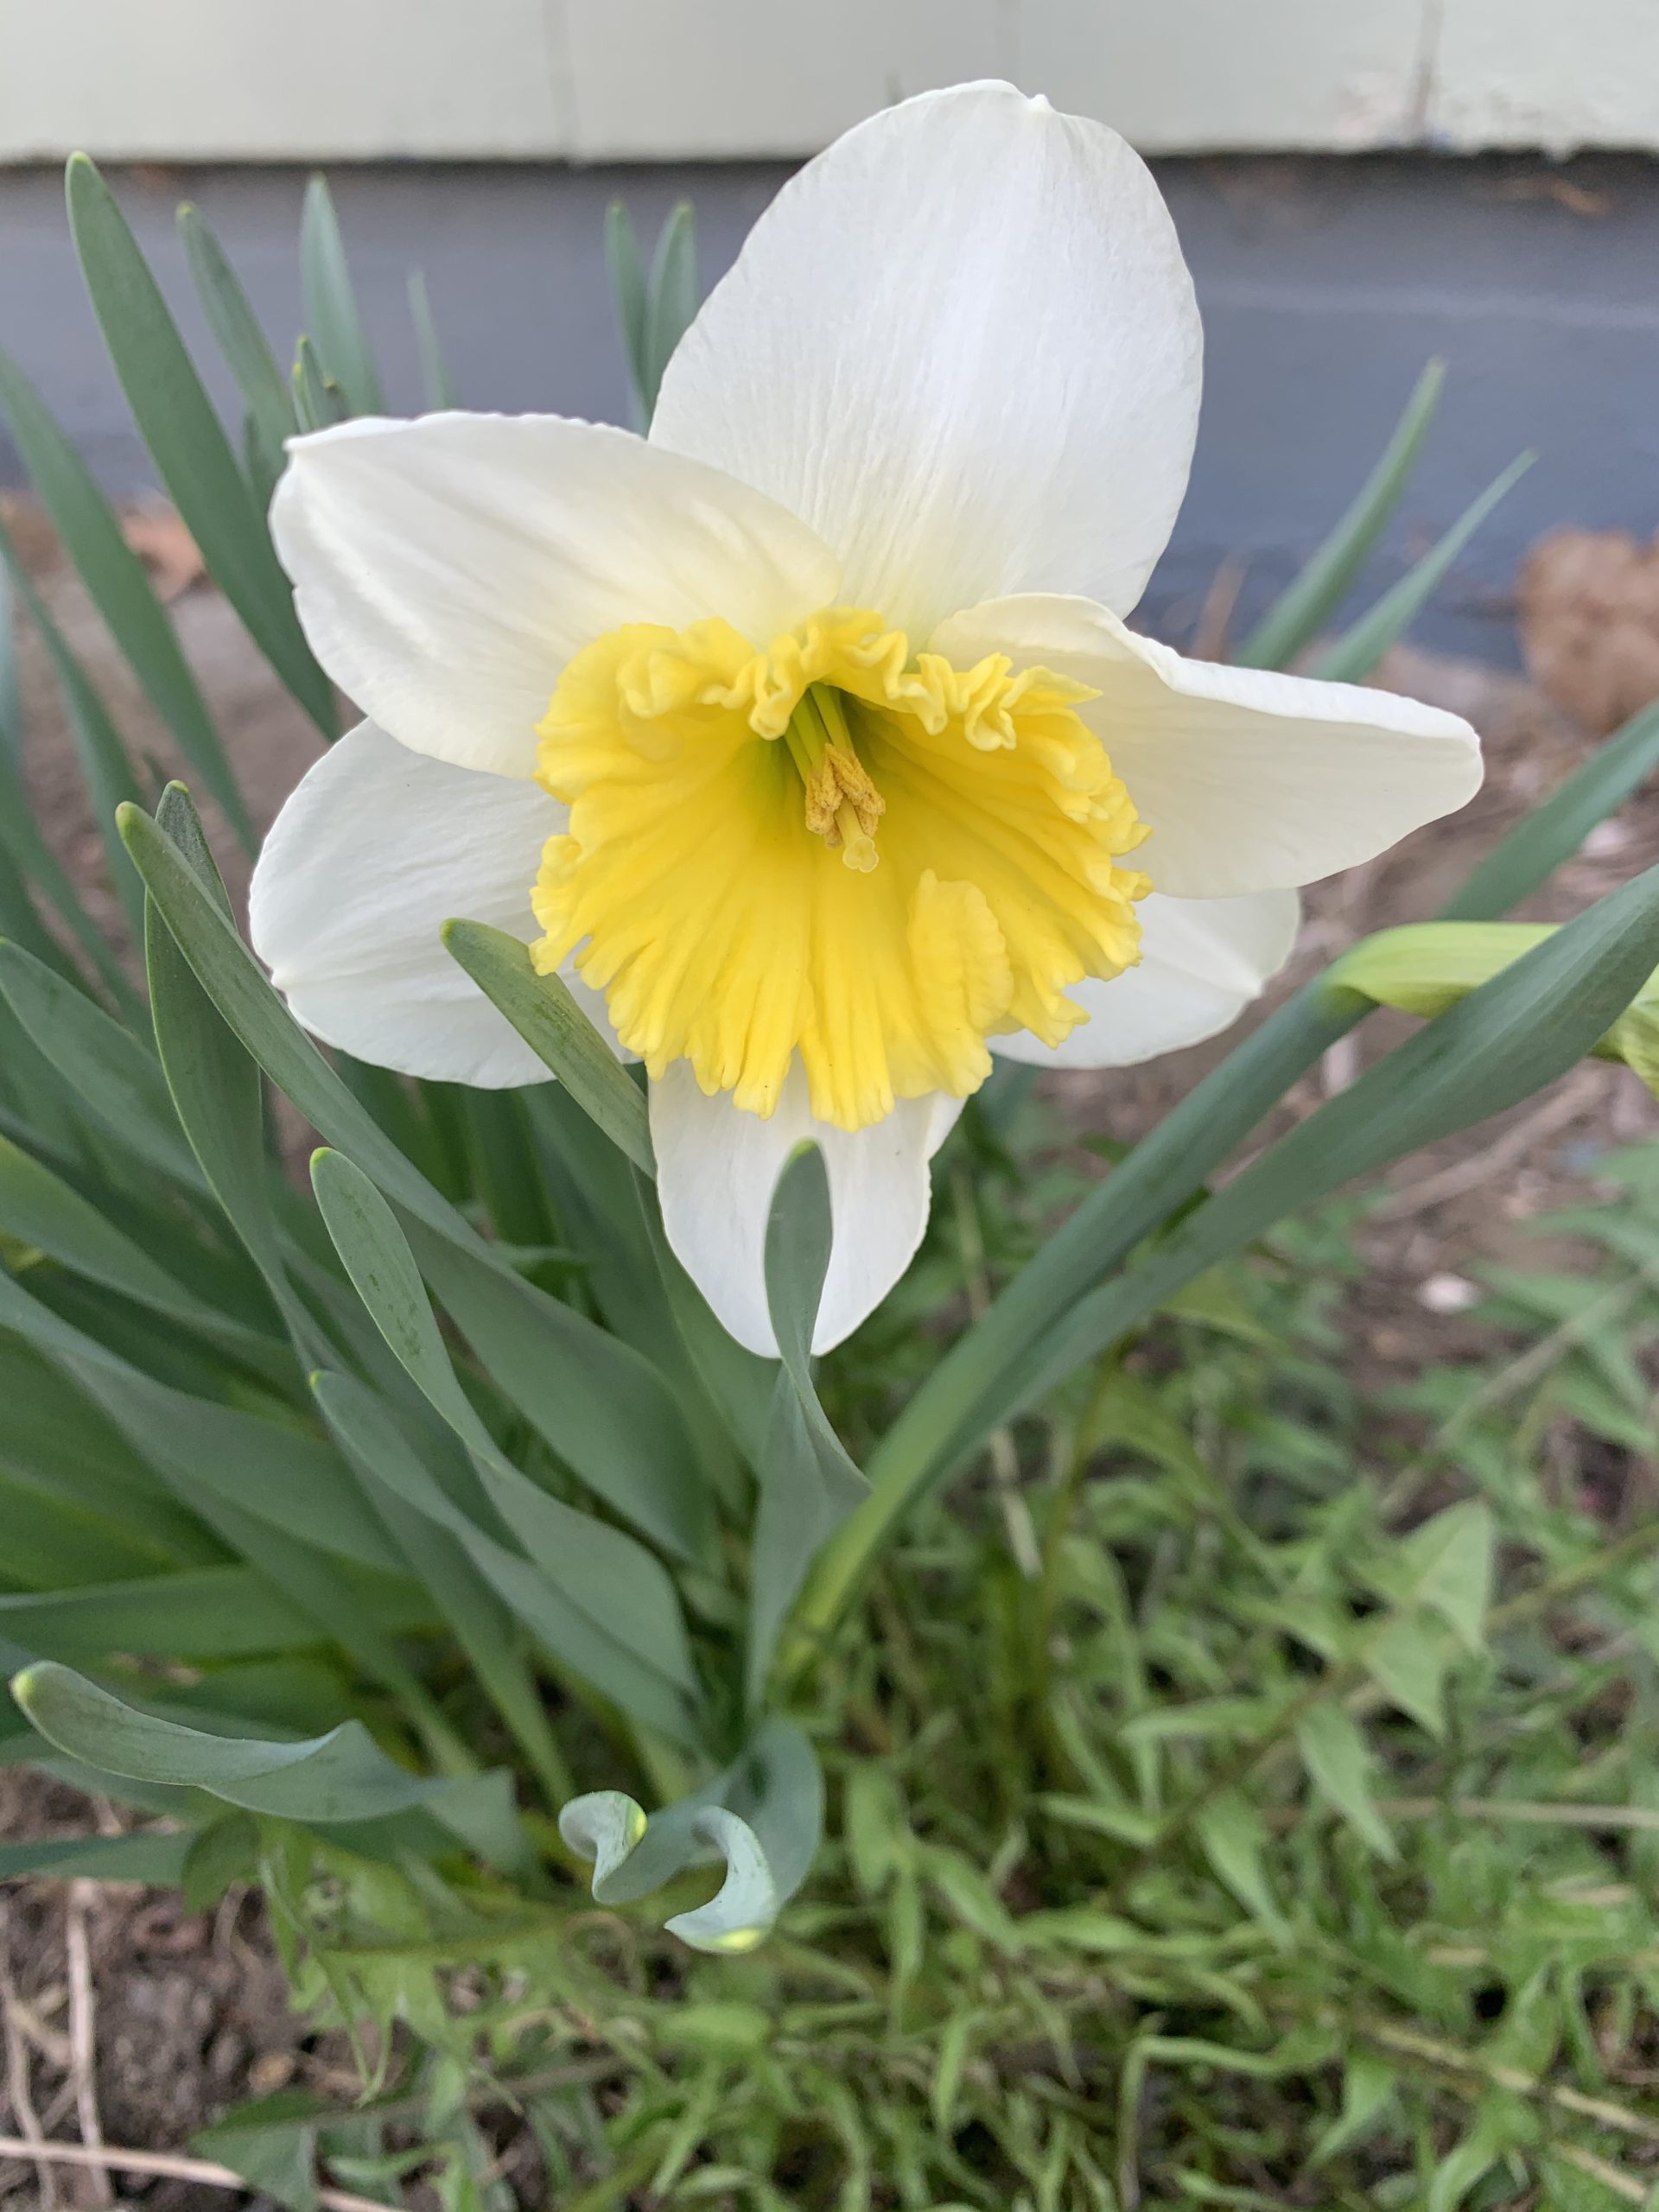 Yellow and white daffodil in the garden at spring time